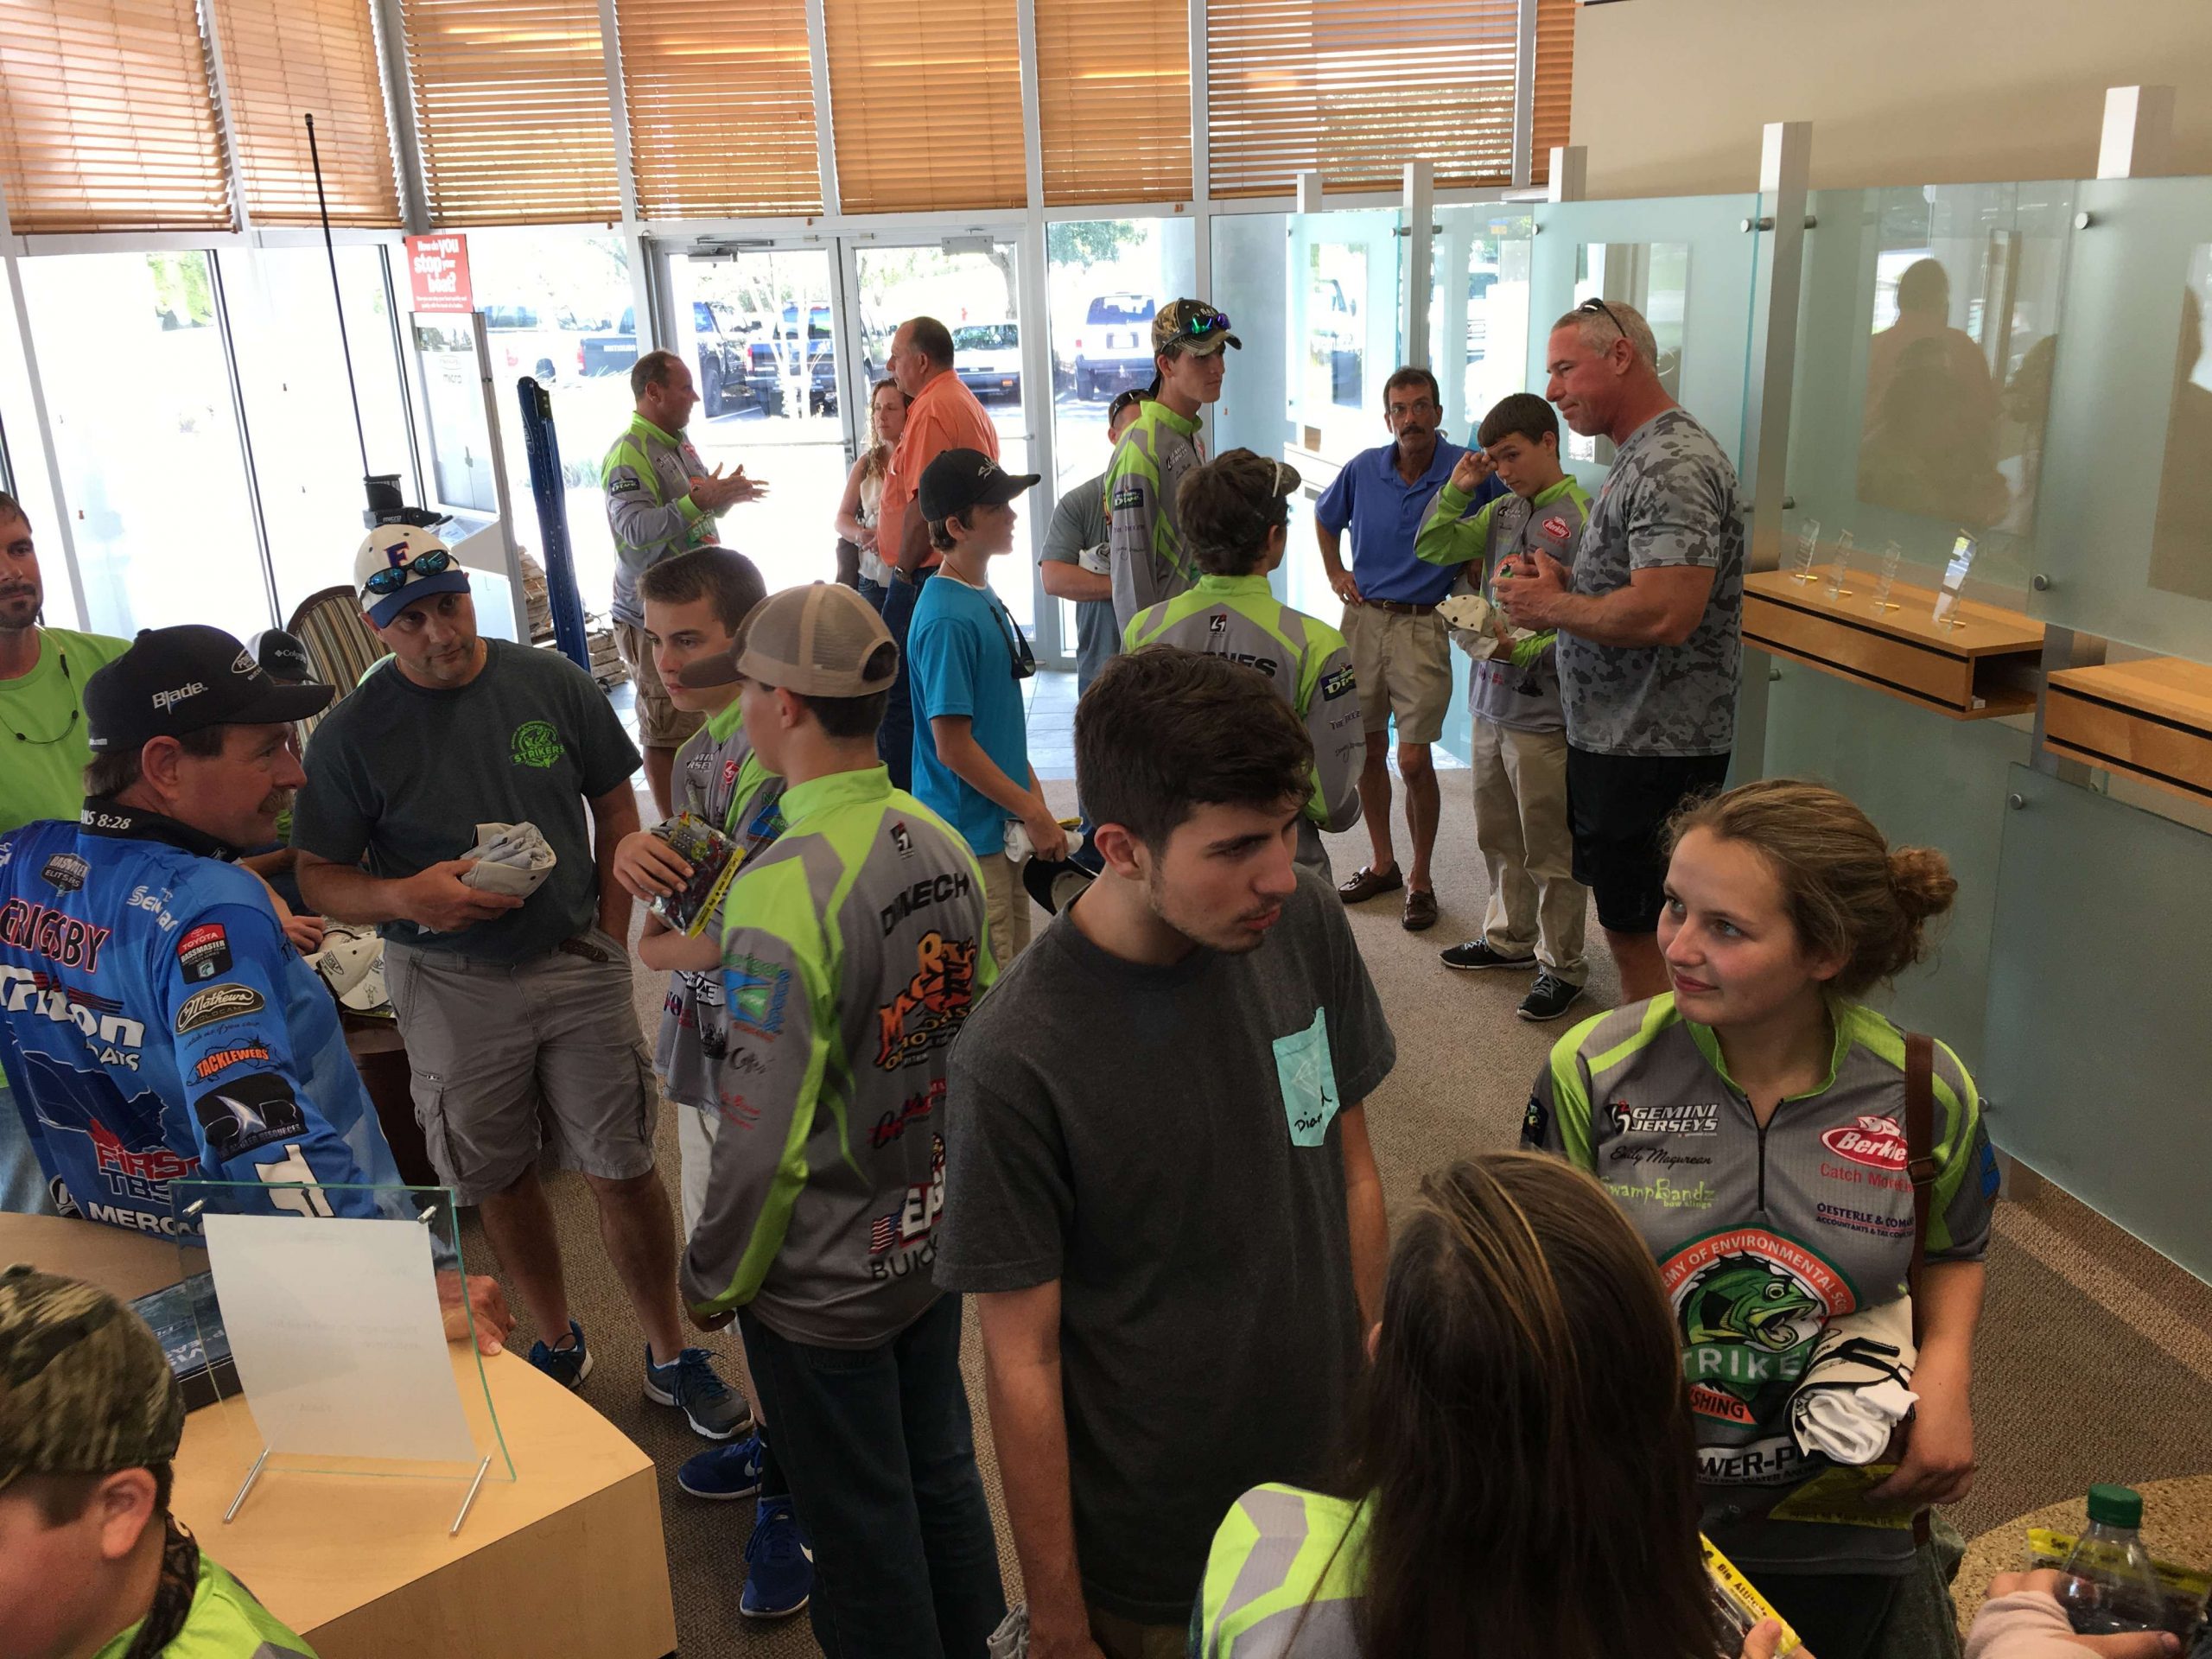 JL Marine offers guided tours through its production facility. Here, company personnel, along with Elite Series pro Shaw Grigsby, greet a visiting group of students from Crystal River, Fla.